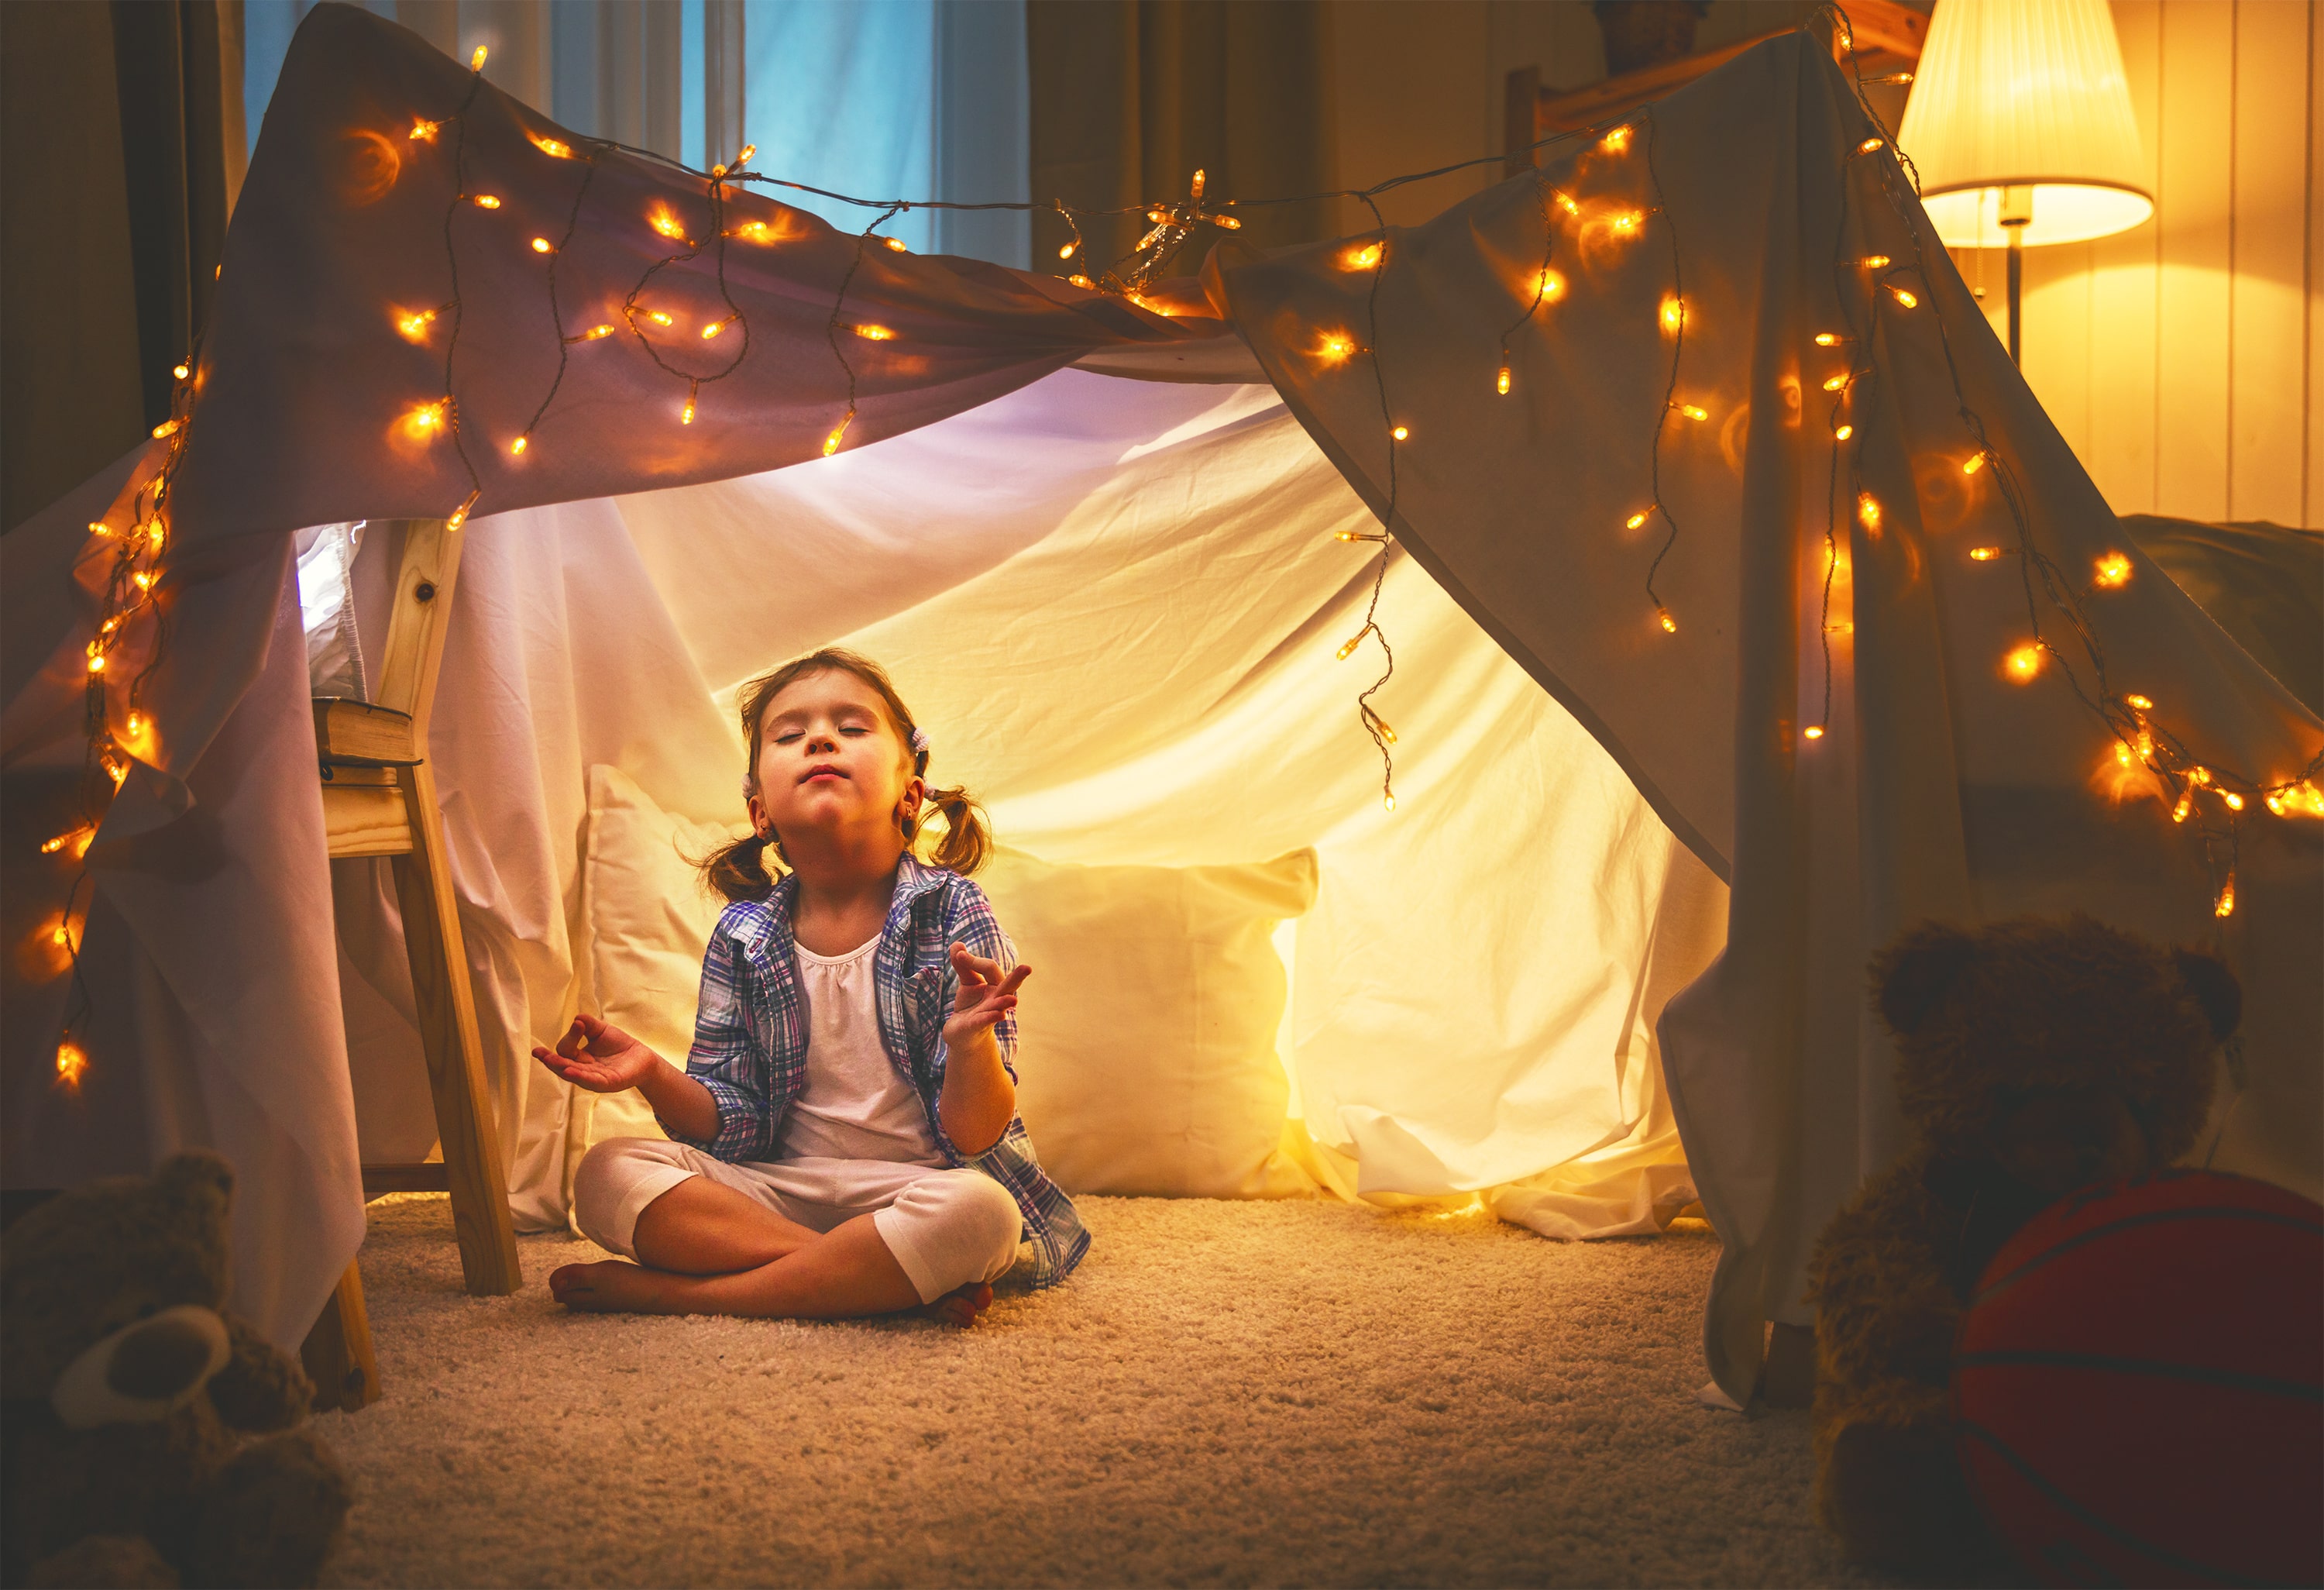 A little girl sat in a home-made den adorned with fairy lights while doing some bedtime yoga